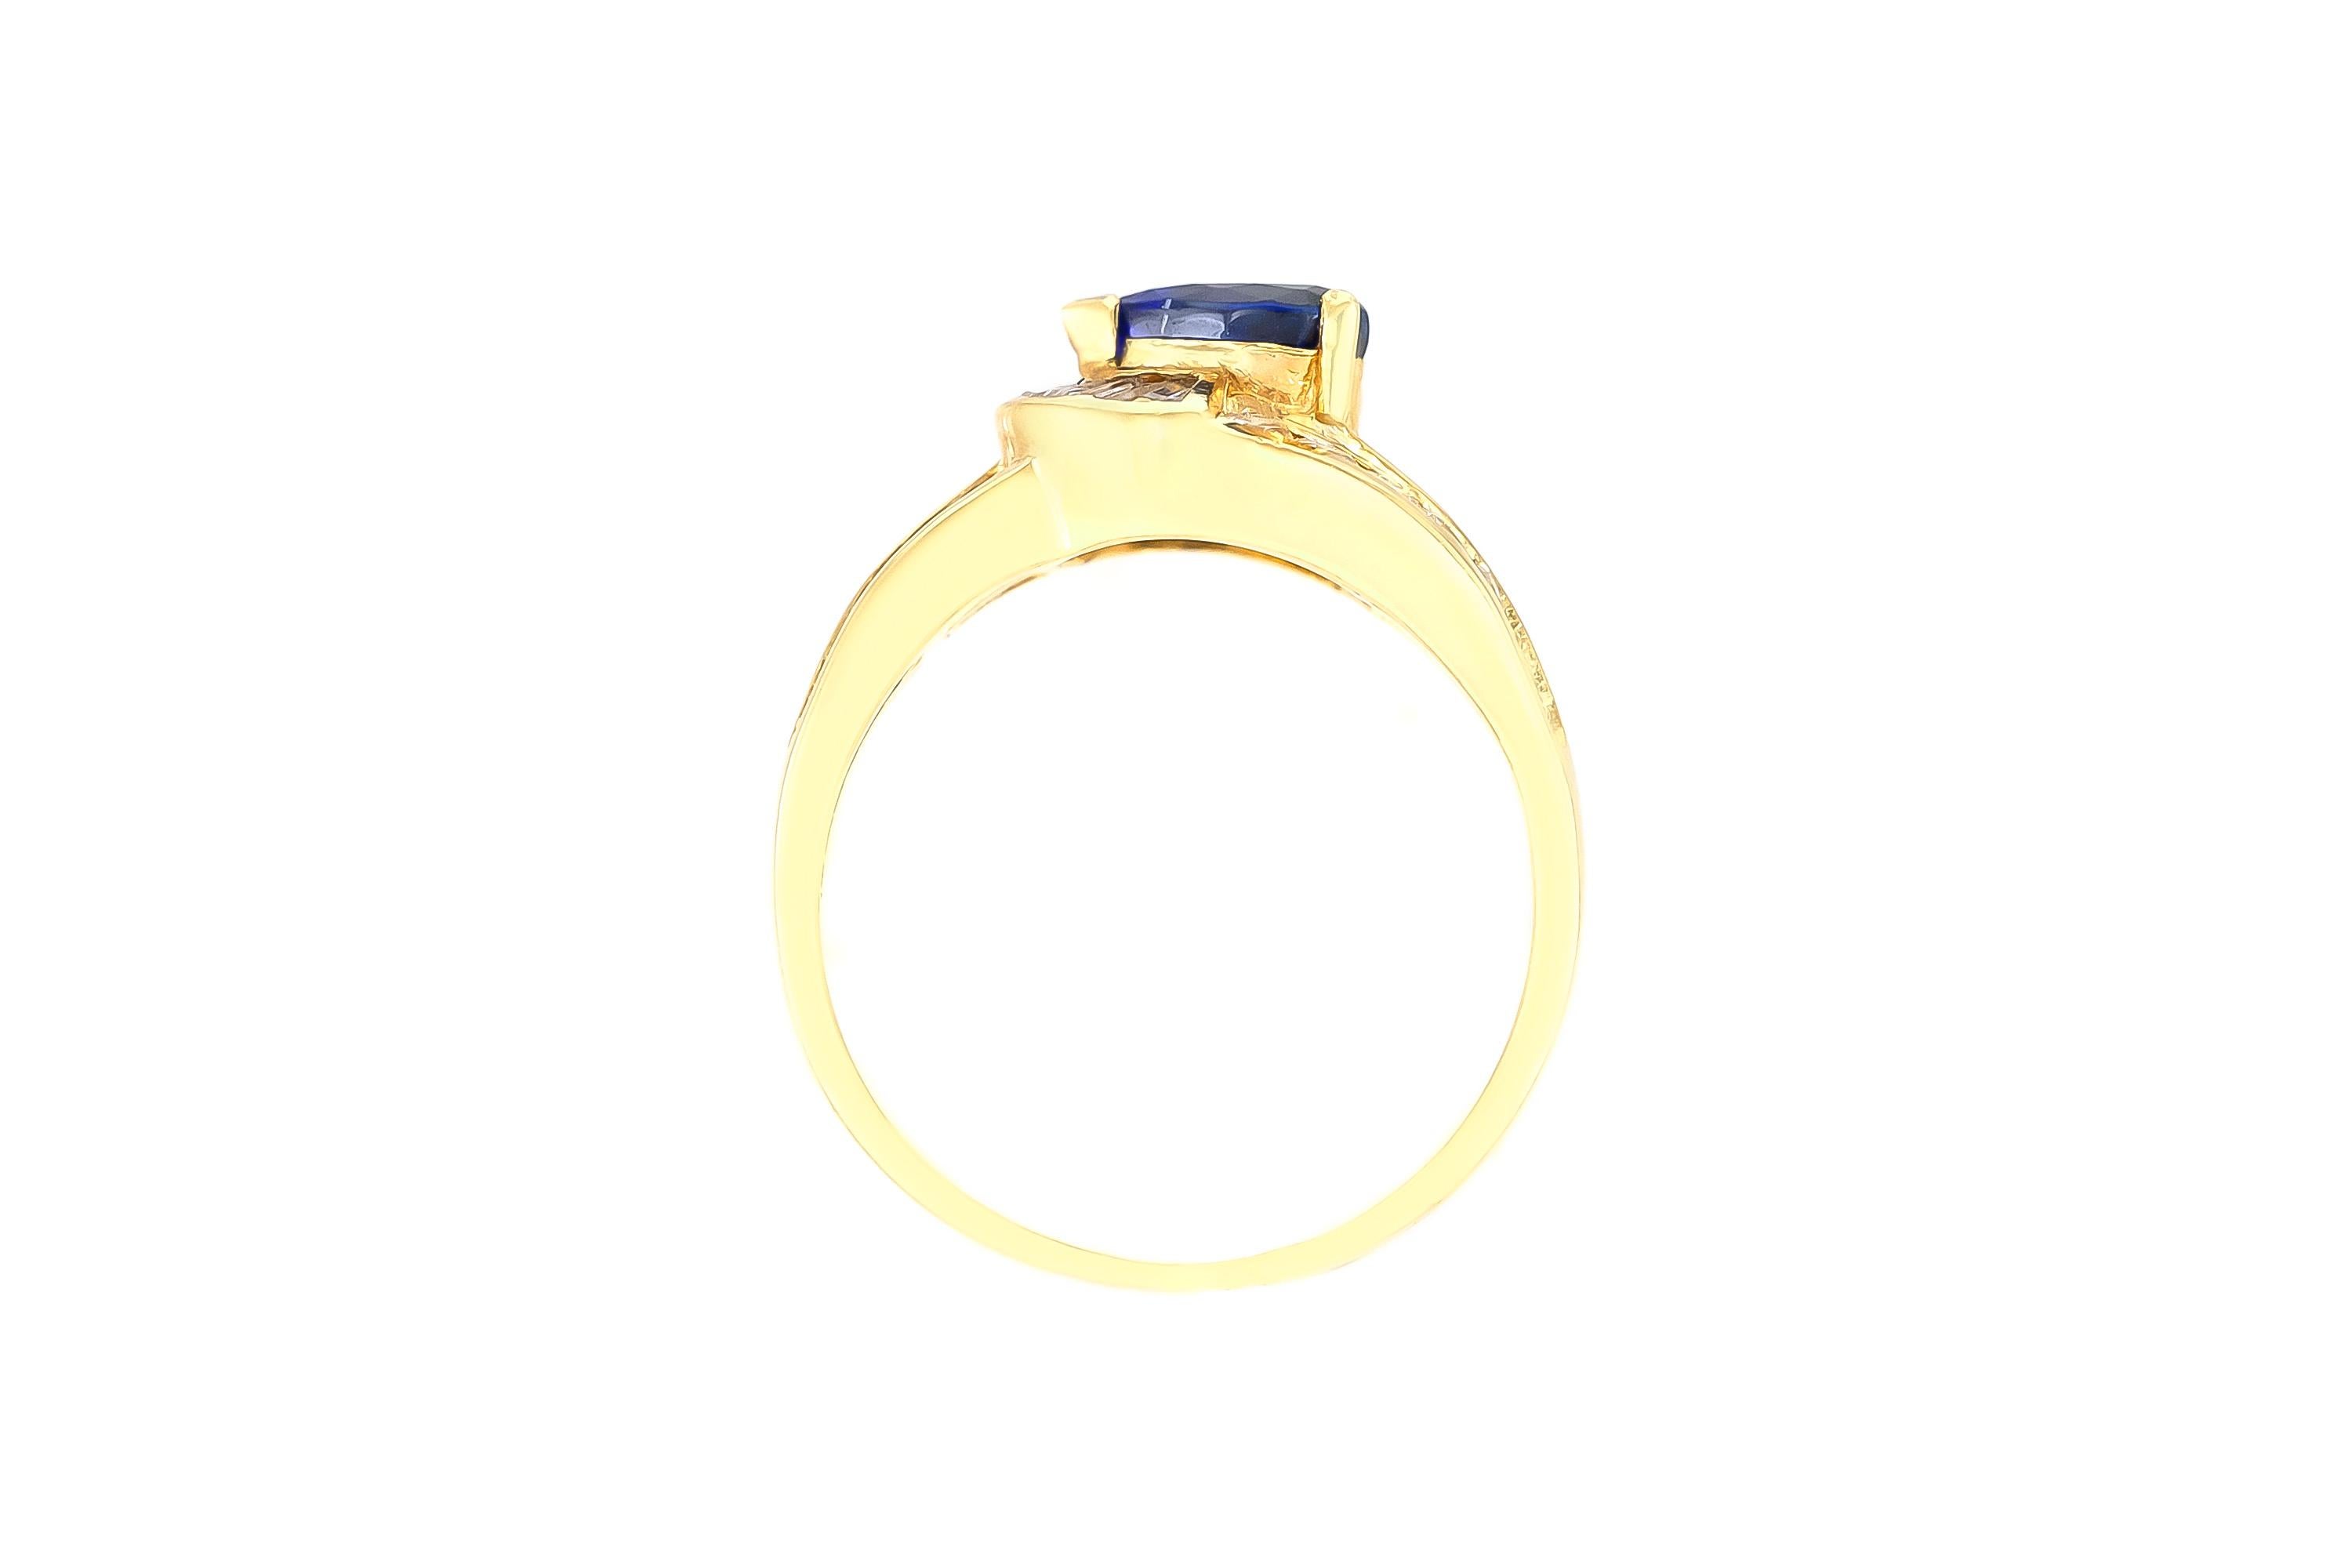 The ring is finely crafted in 14k yellow gold with diamonds weighing approximately total of 0.65 carat and sapphire weighing approximately total of 1.42 carat.
Circa 1980.